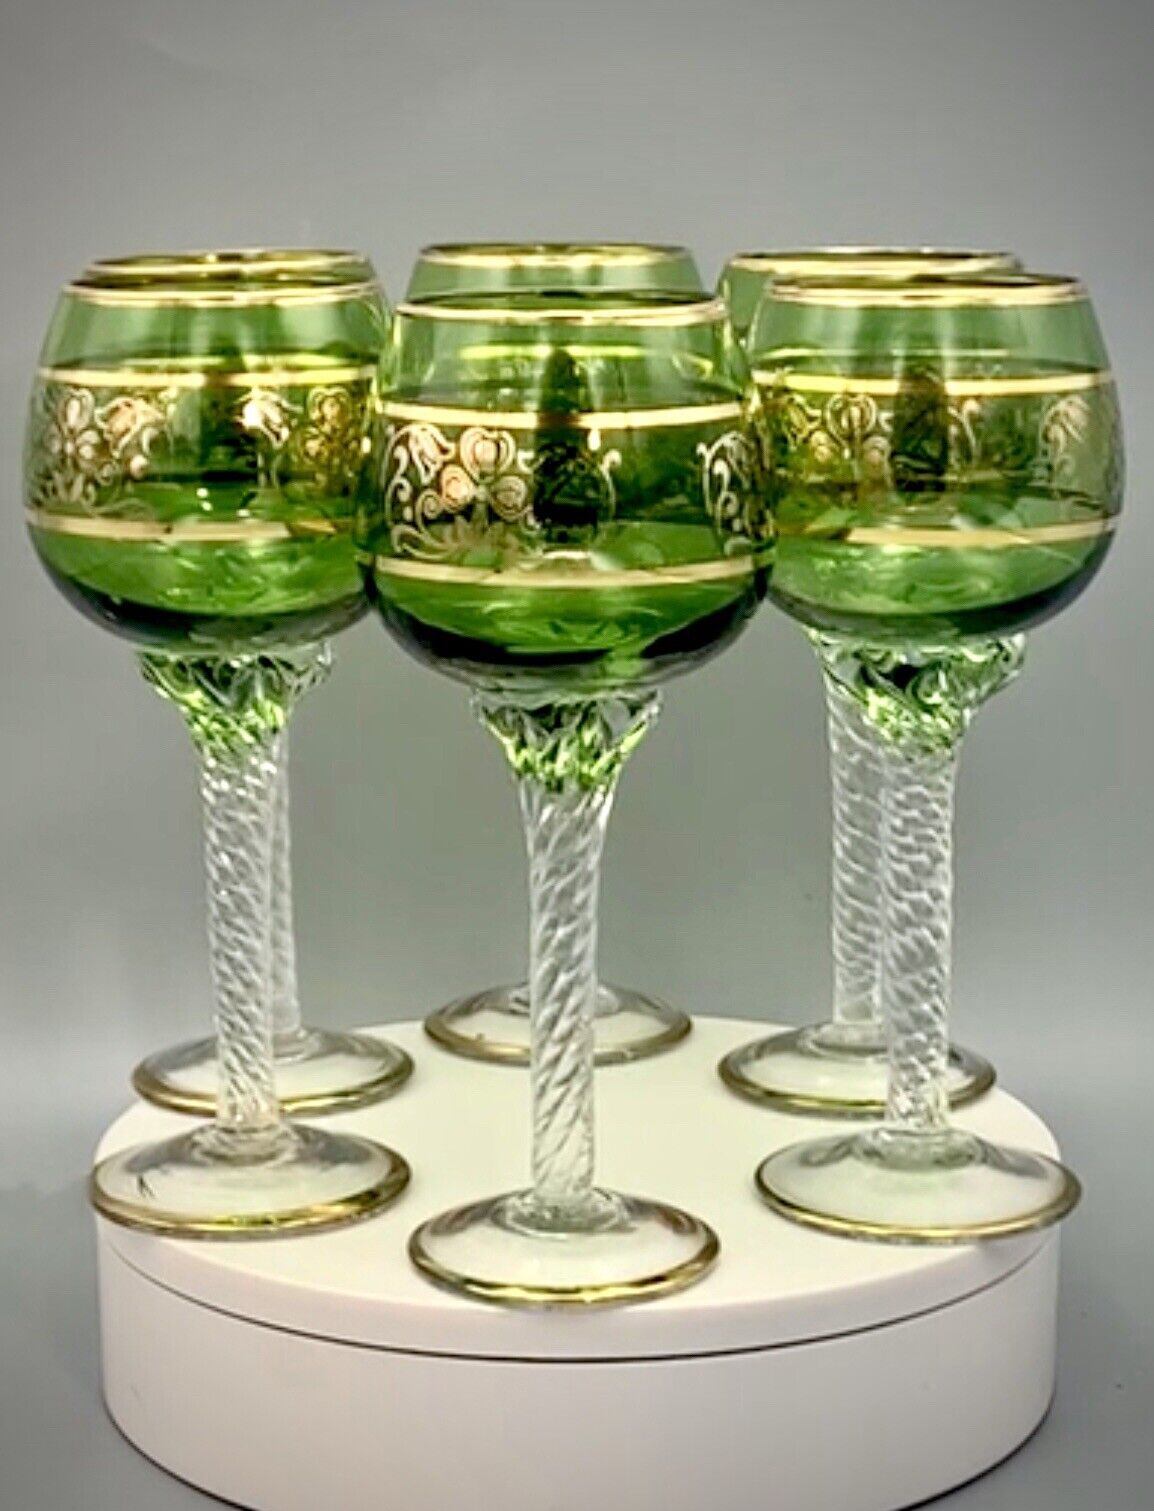 Rare Vintage Green Gilded Italian Hand Blown Spiral Twisted Stem Glasses. 6pcs